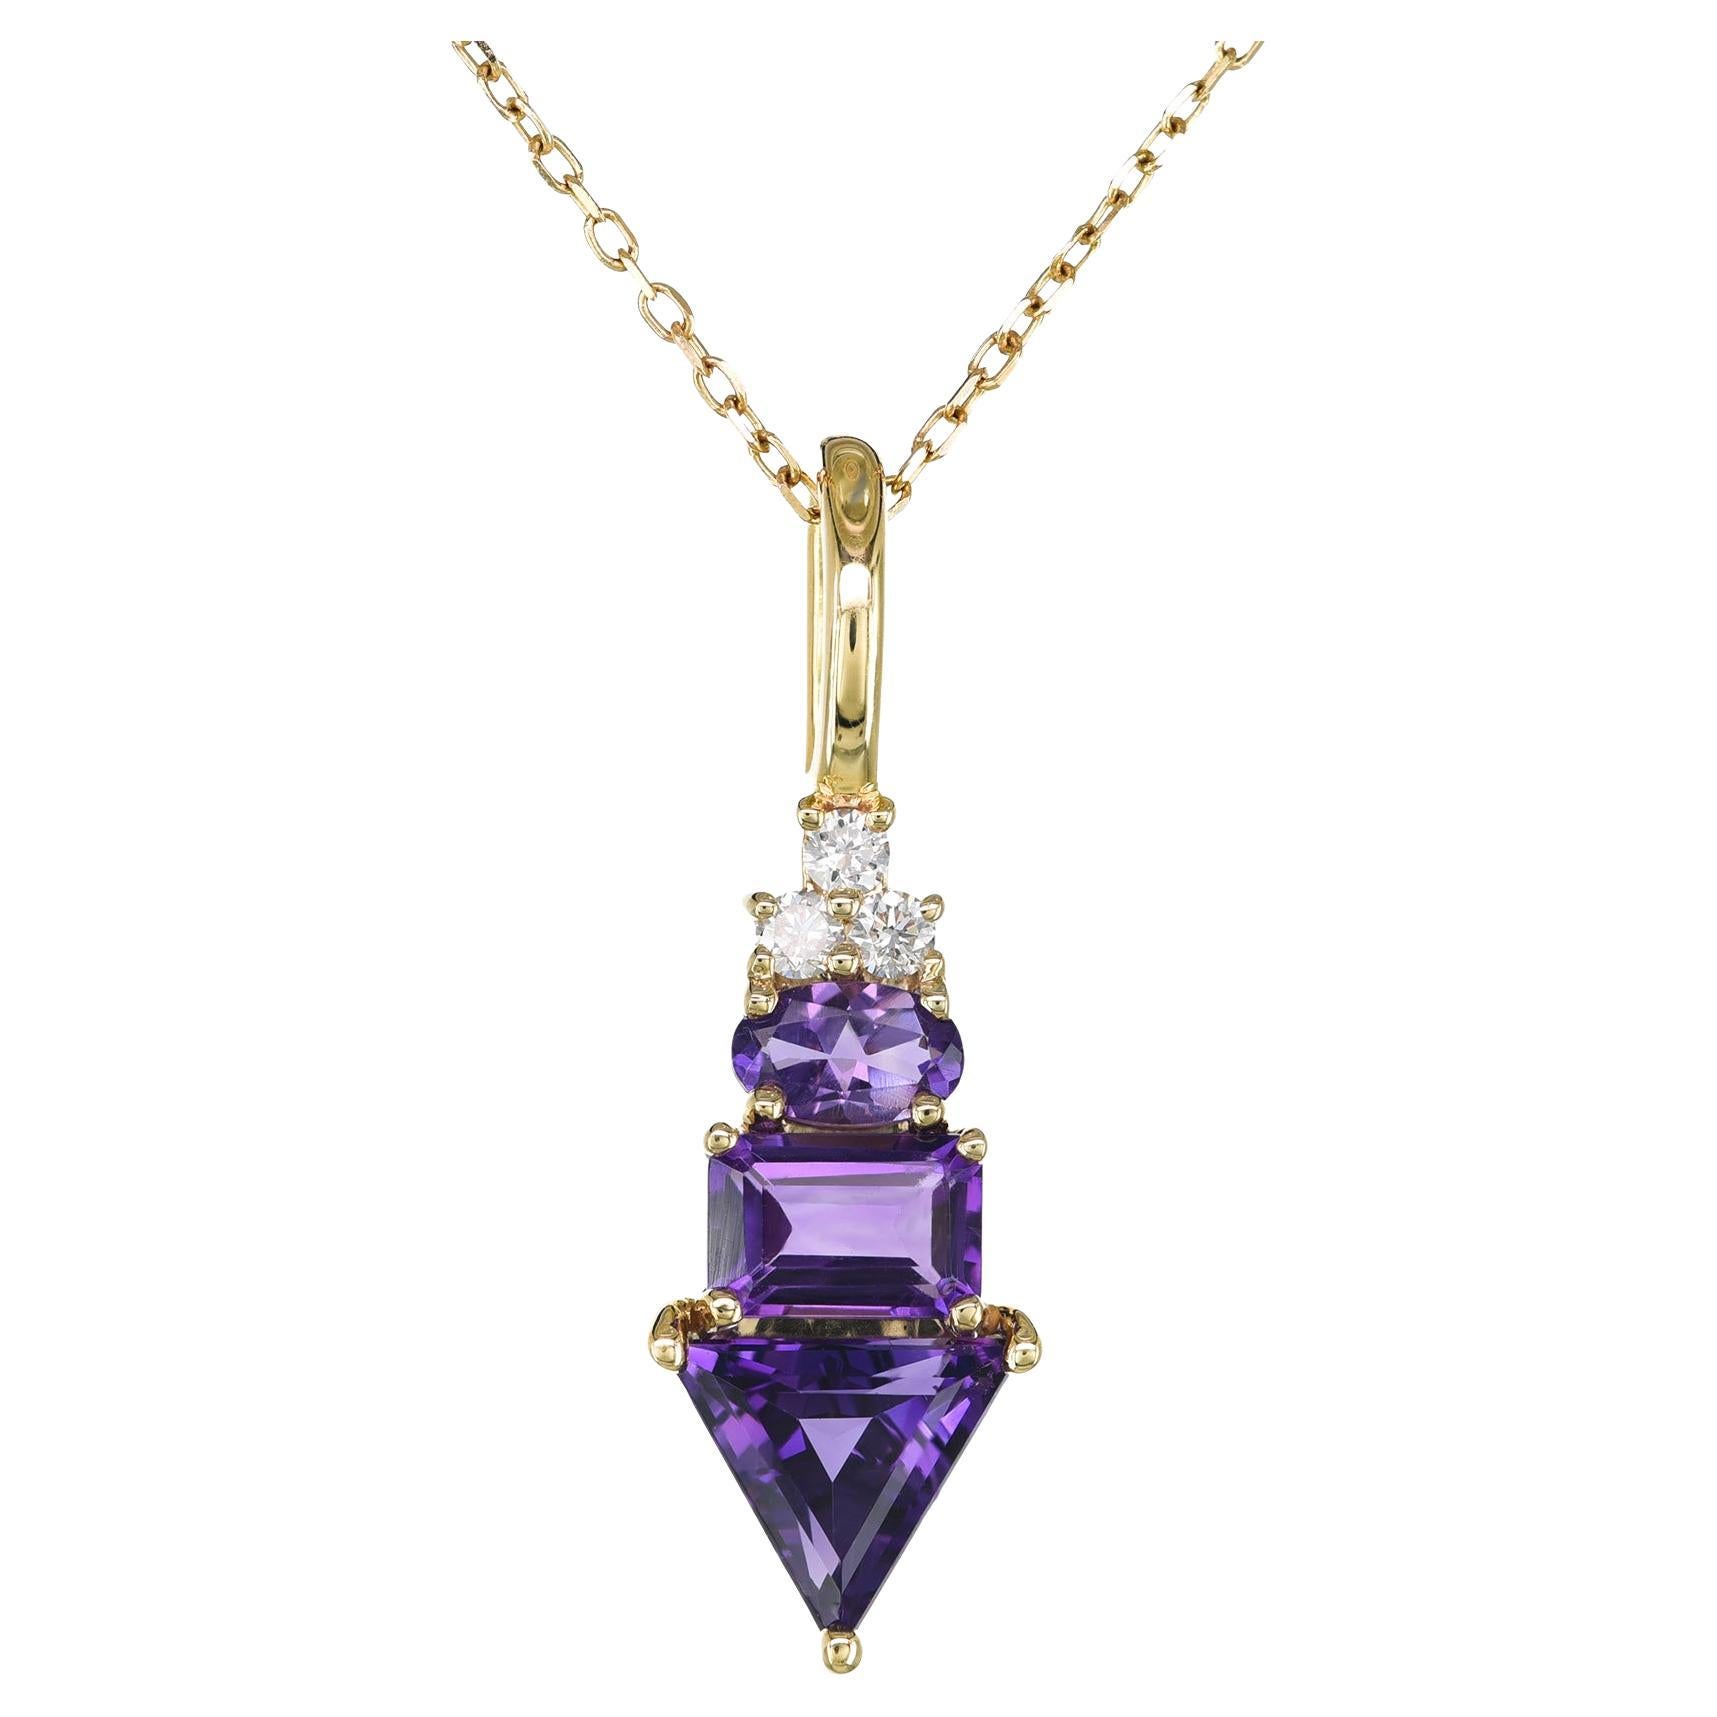 Pendant with Natural Amethyst 1.41 carats set in 14K Yellow Gold with Diamonds For Sale